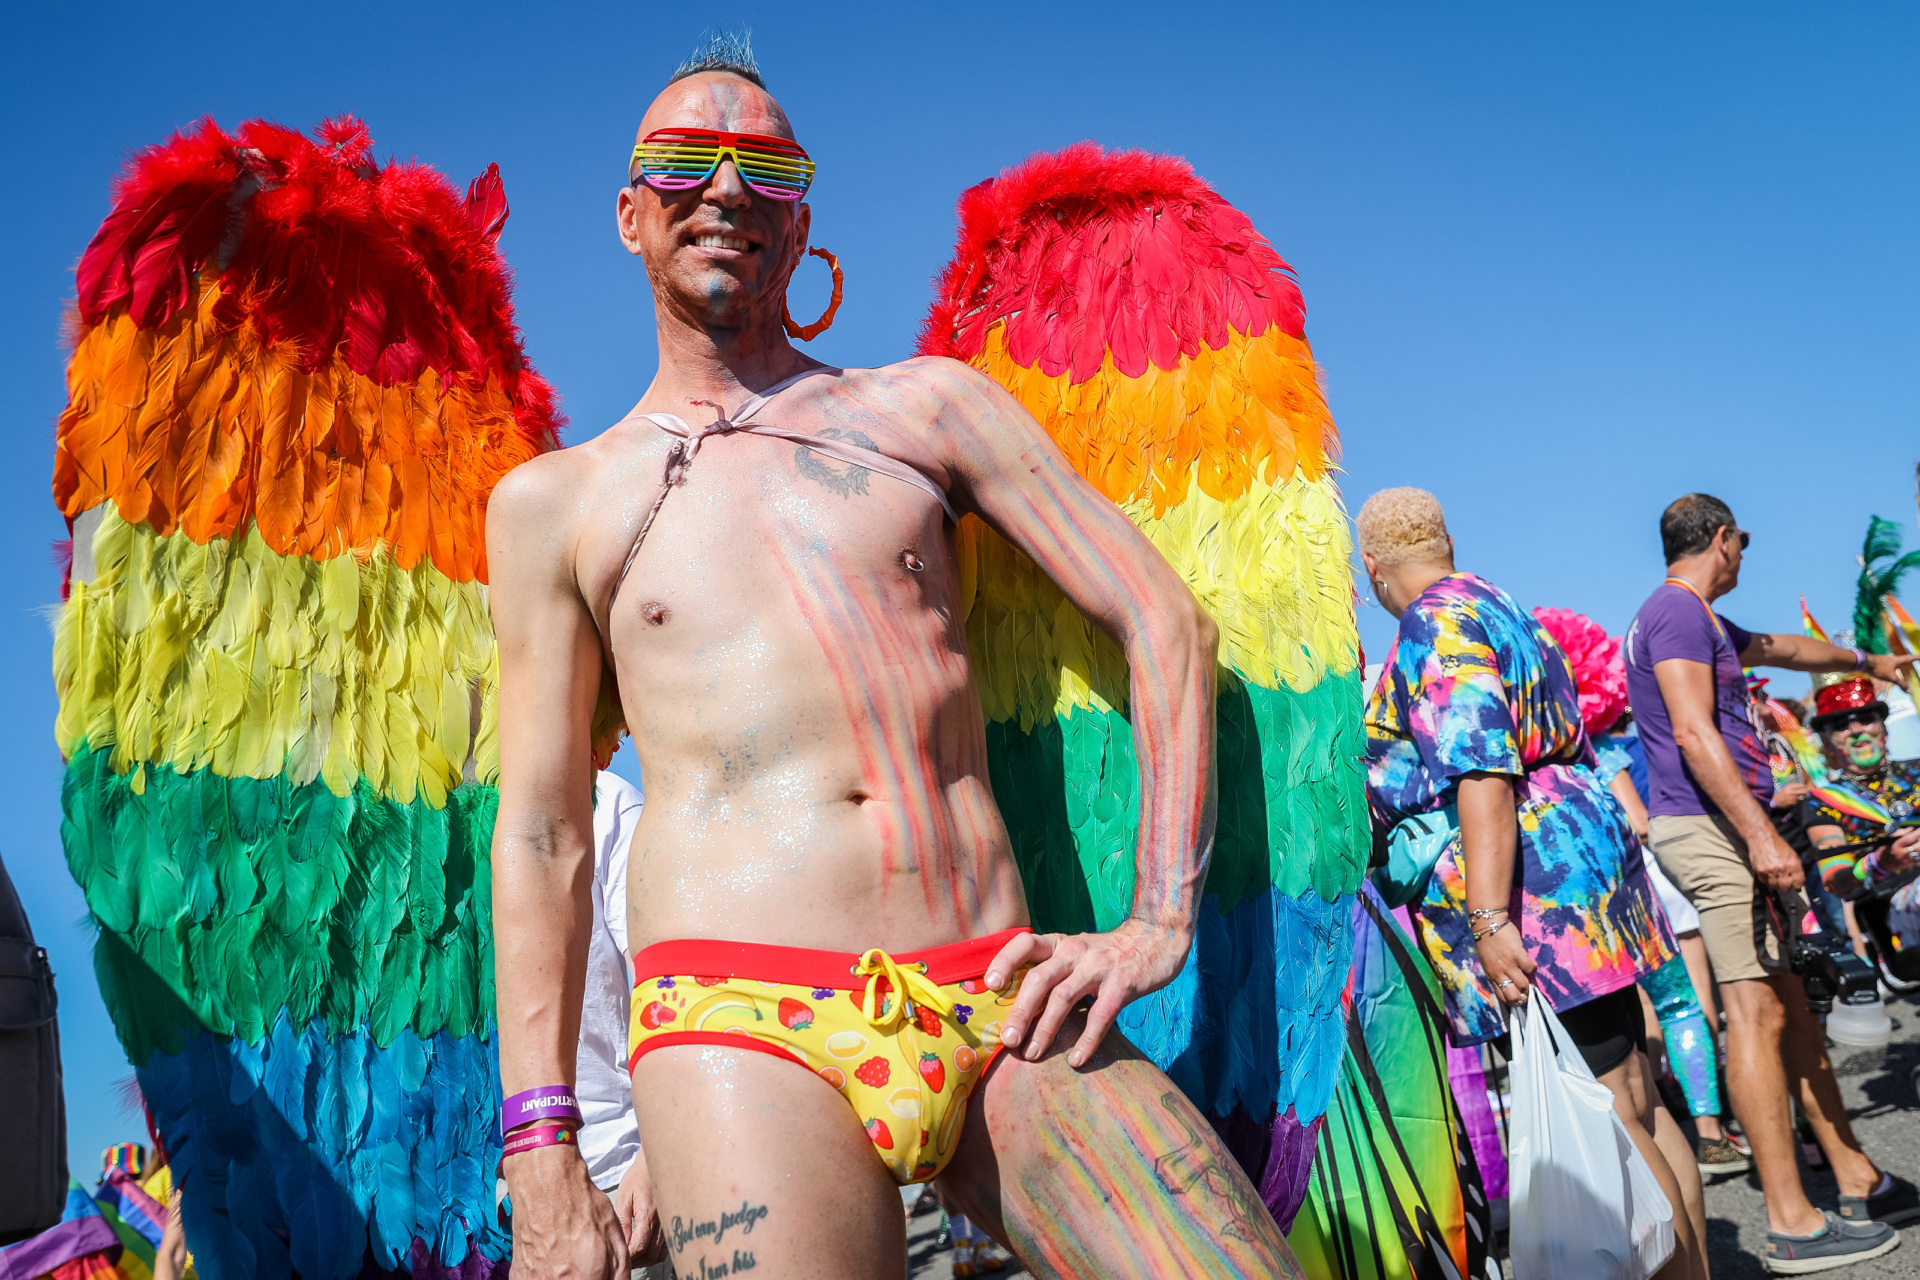 BRIGHTON, ENGLAND - AUGUST 06: A festival goer poses at the Pride LGBTQ+ Community Parade – 'Love, Protest & Unity' during Brighton Pride on August 6, 2022 in Brighton, England.  (Photo by Tristan Fewings/Getty Images)